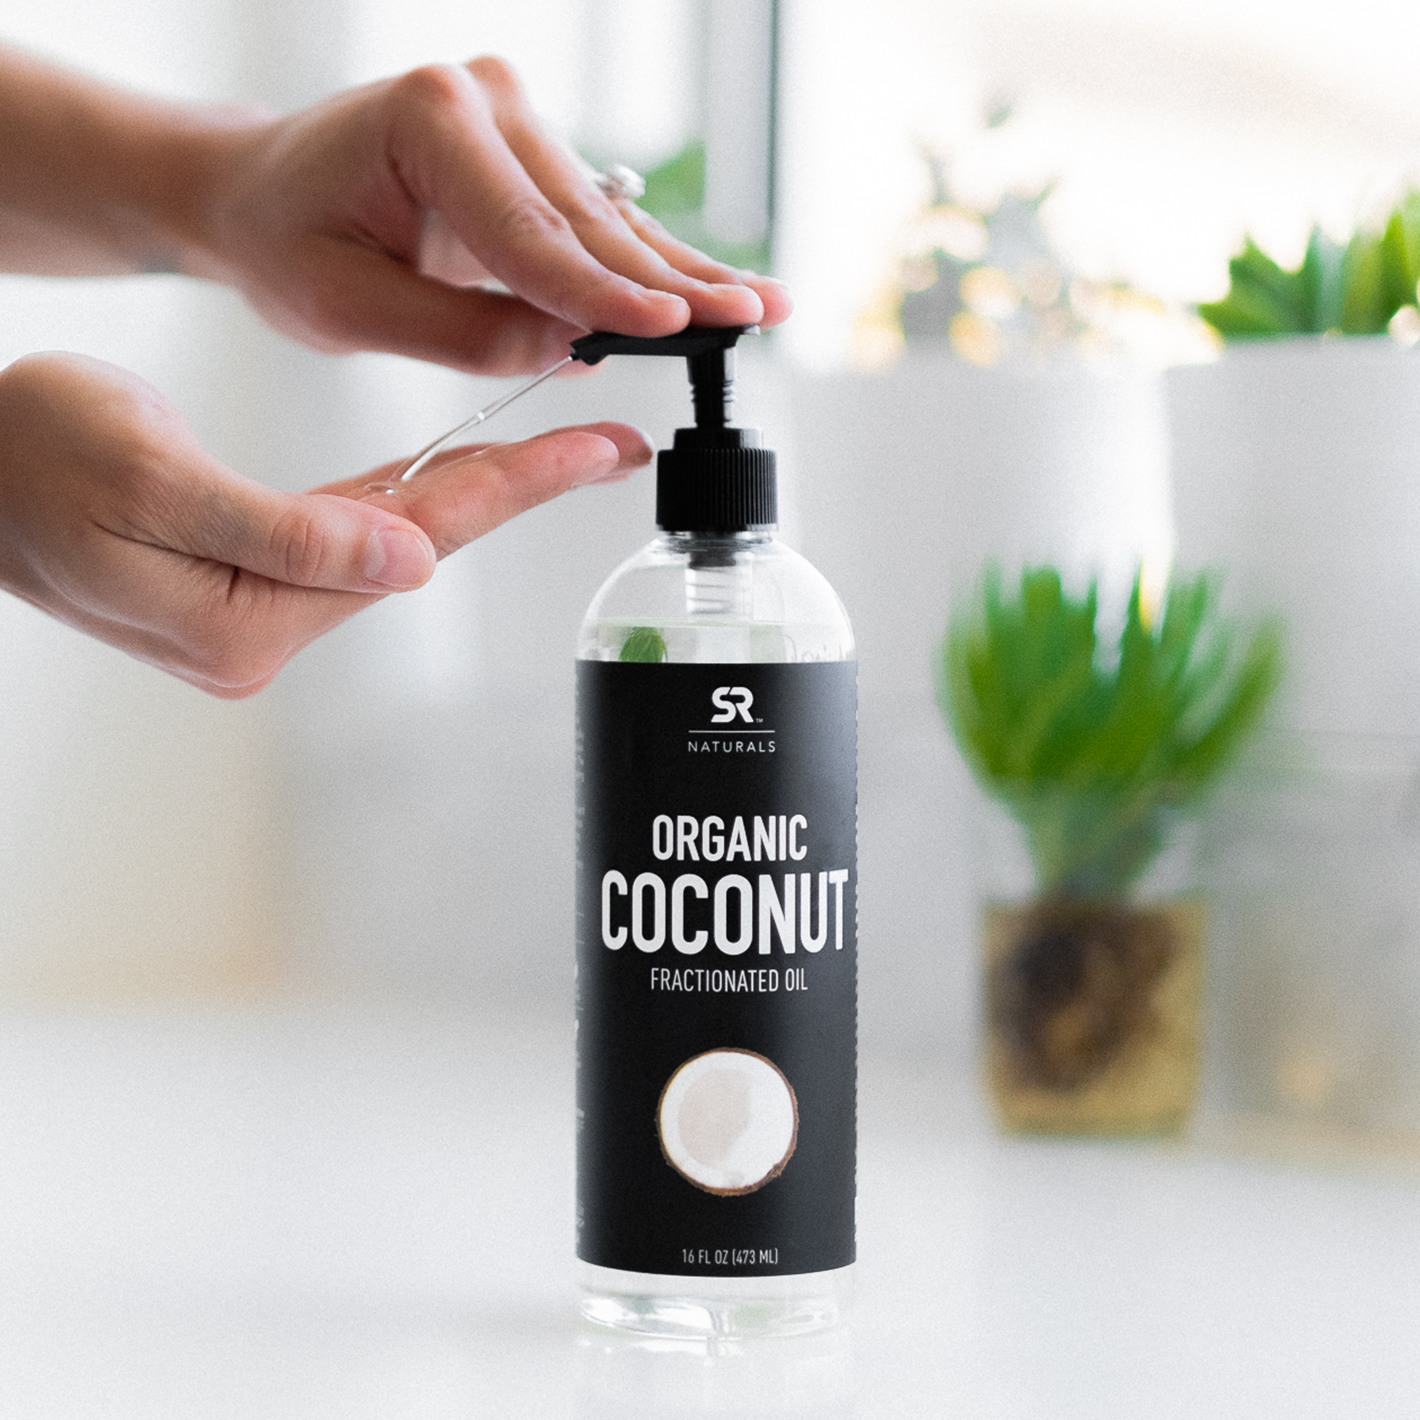 Woman pumping Sports Research Naturals Fractionated Organic Coconut oil out of the bottle into her hands.